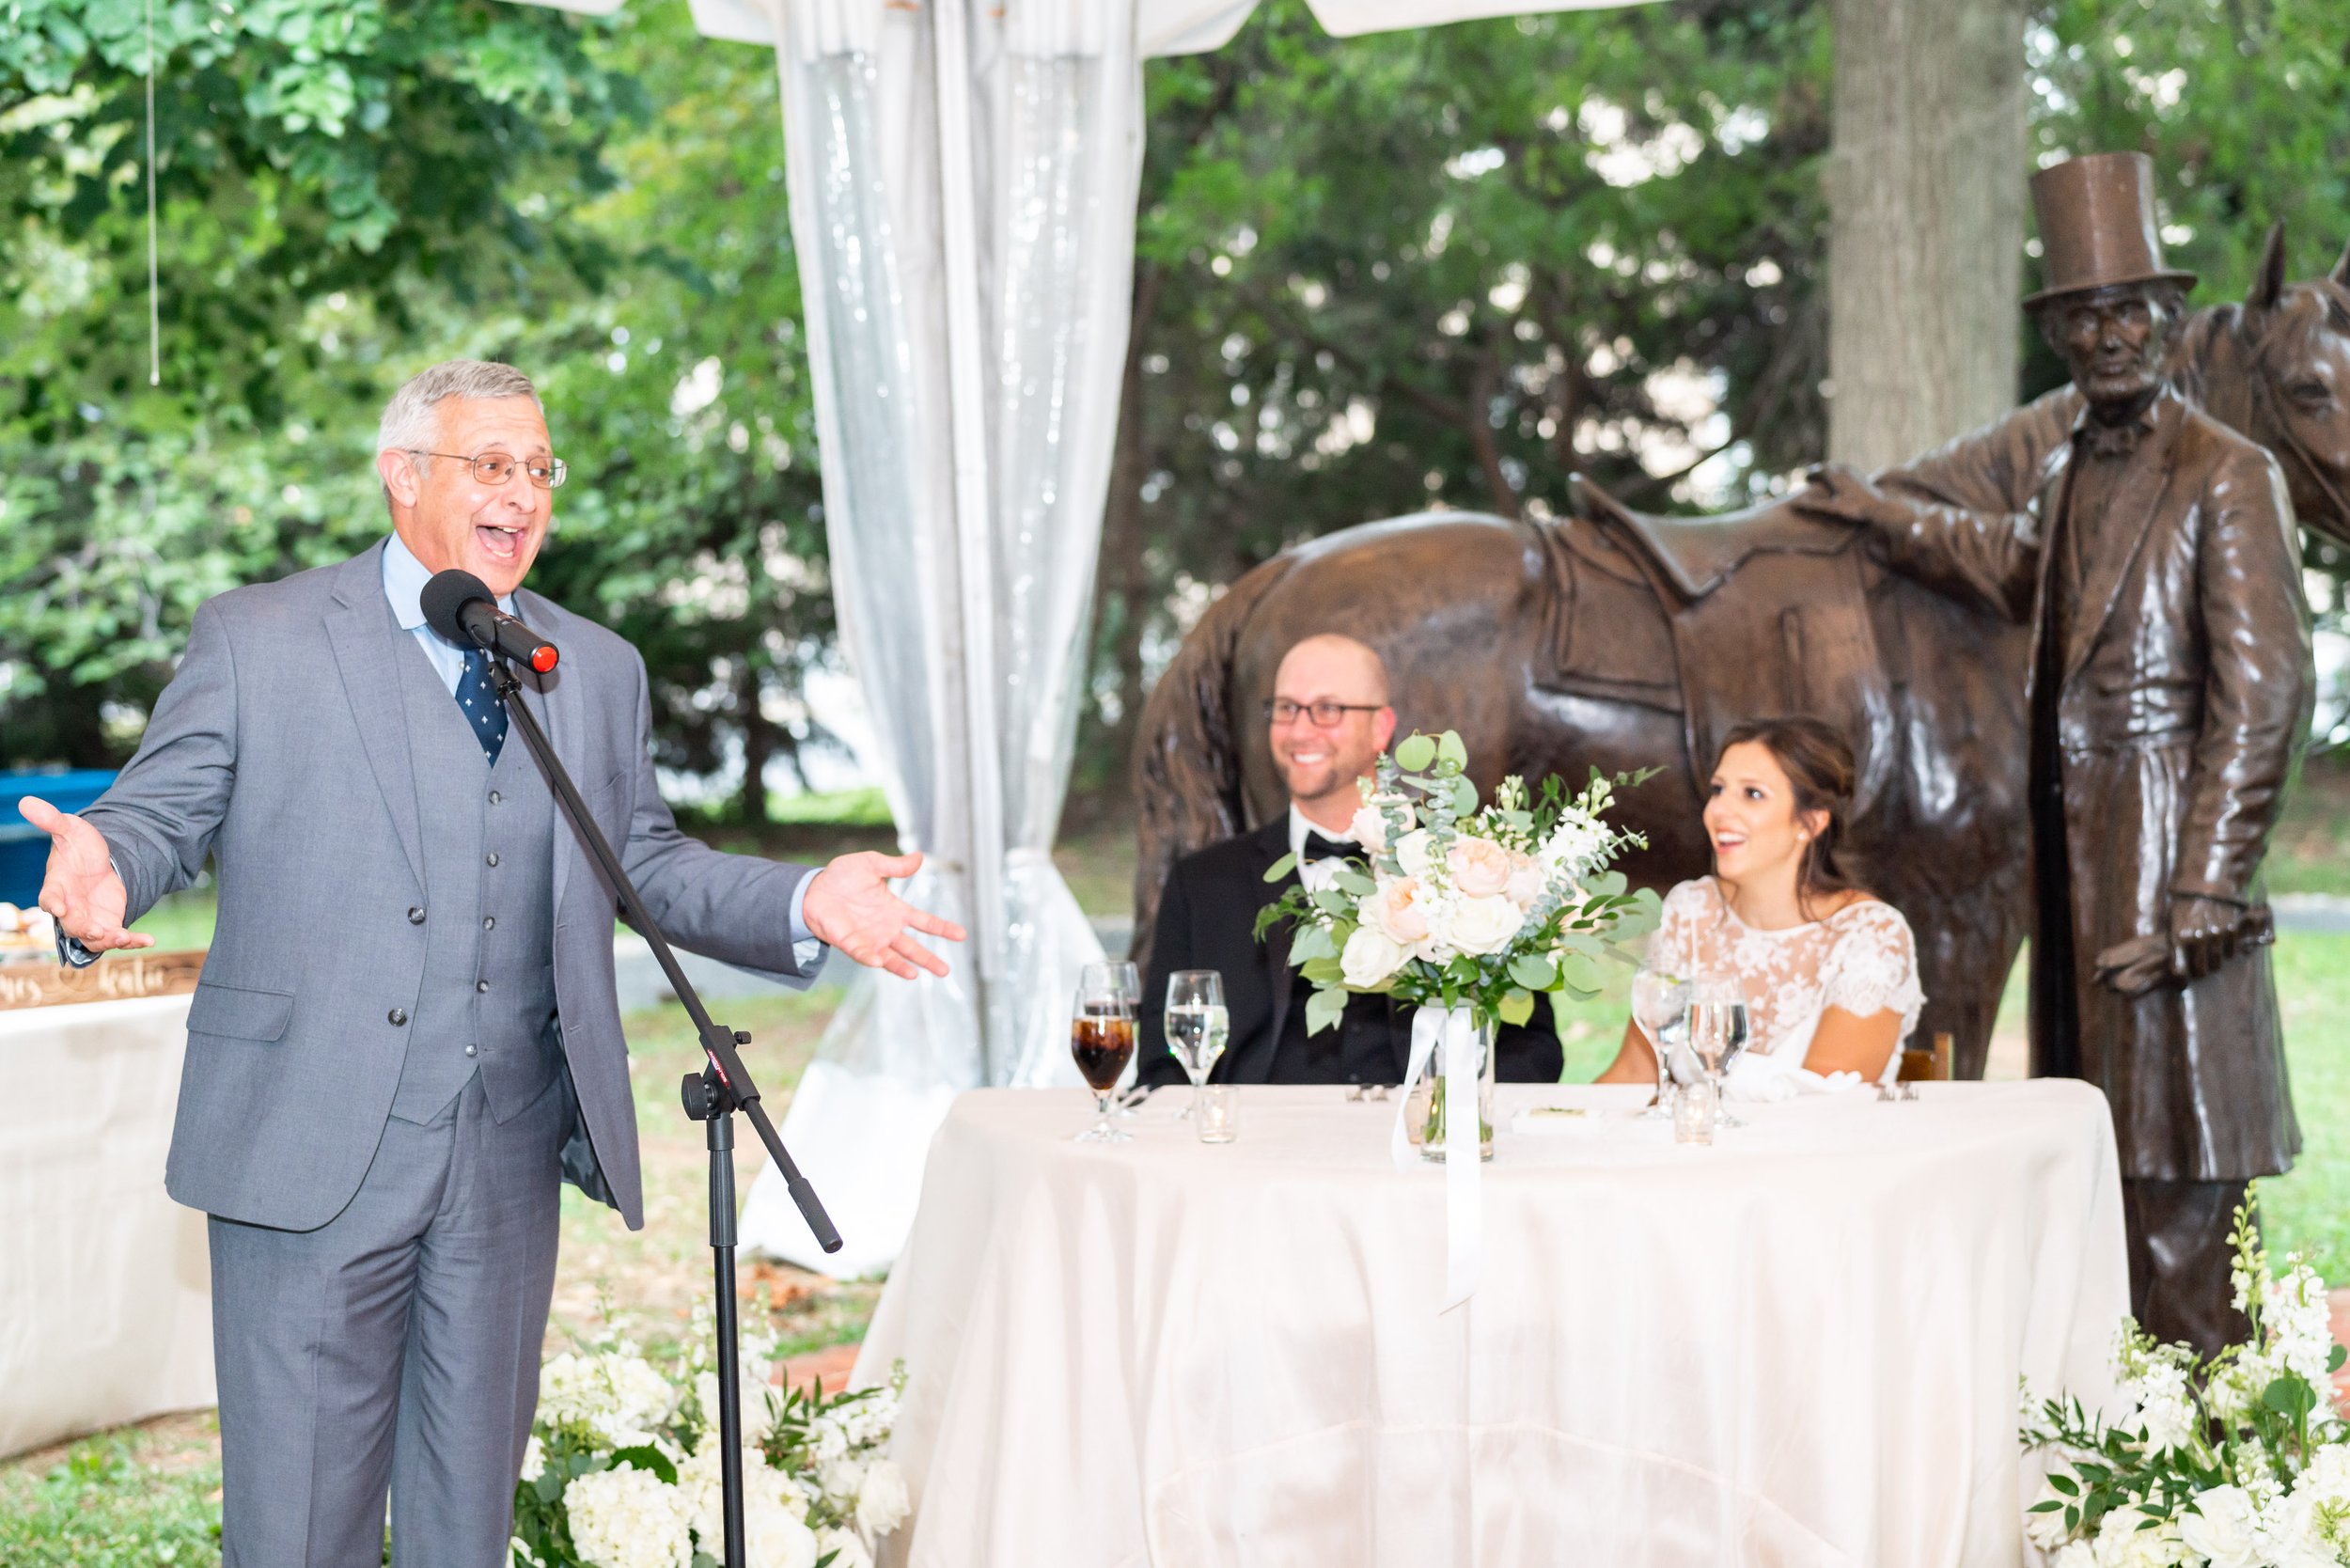 Bride's father gives touching speech to the newlyweds during wedding reception